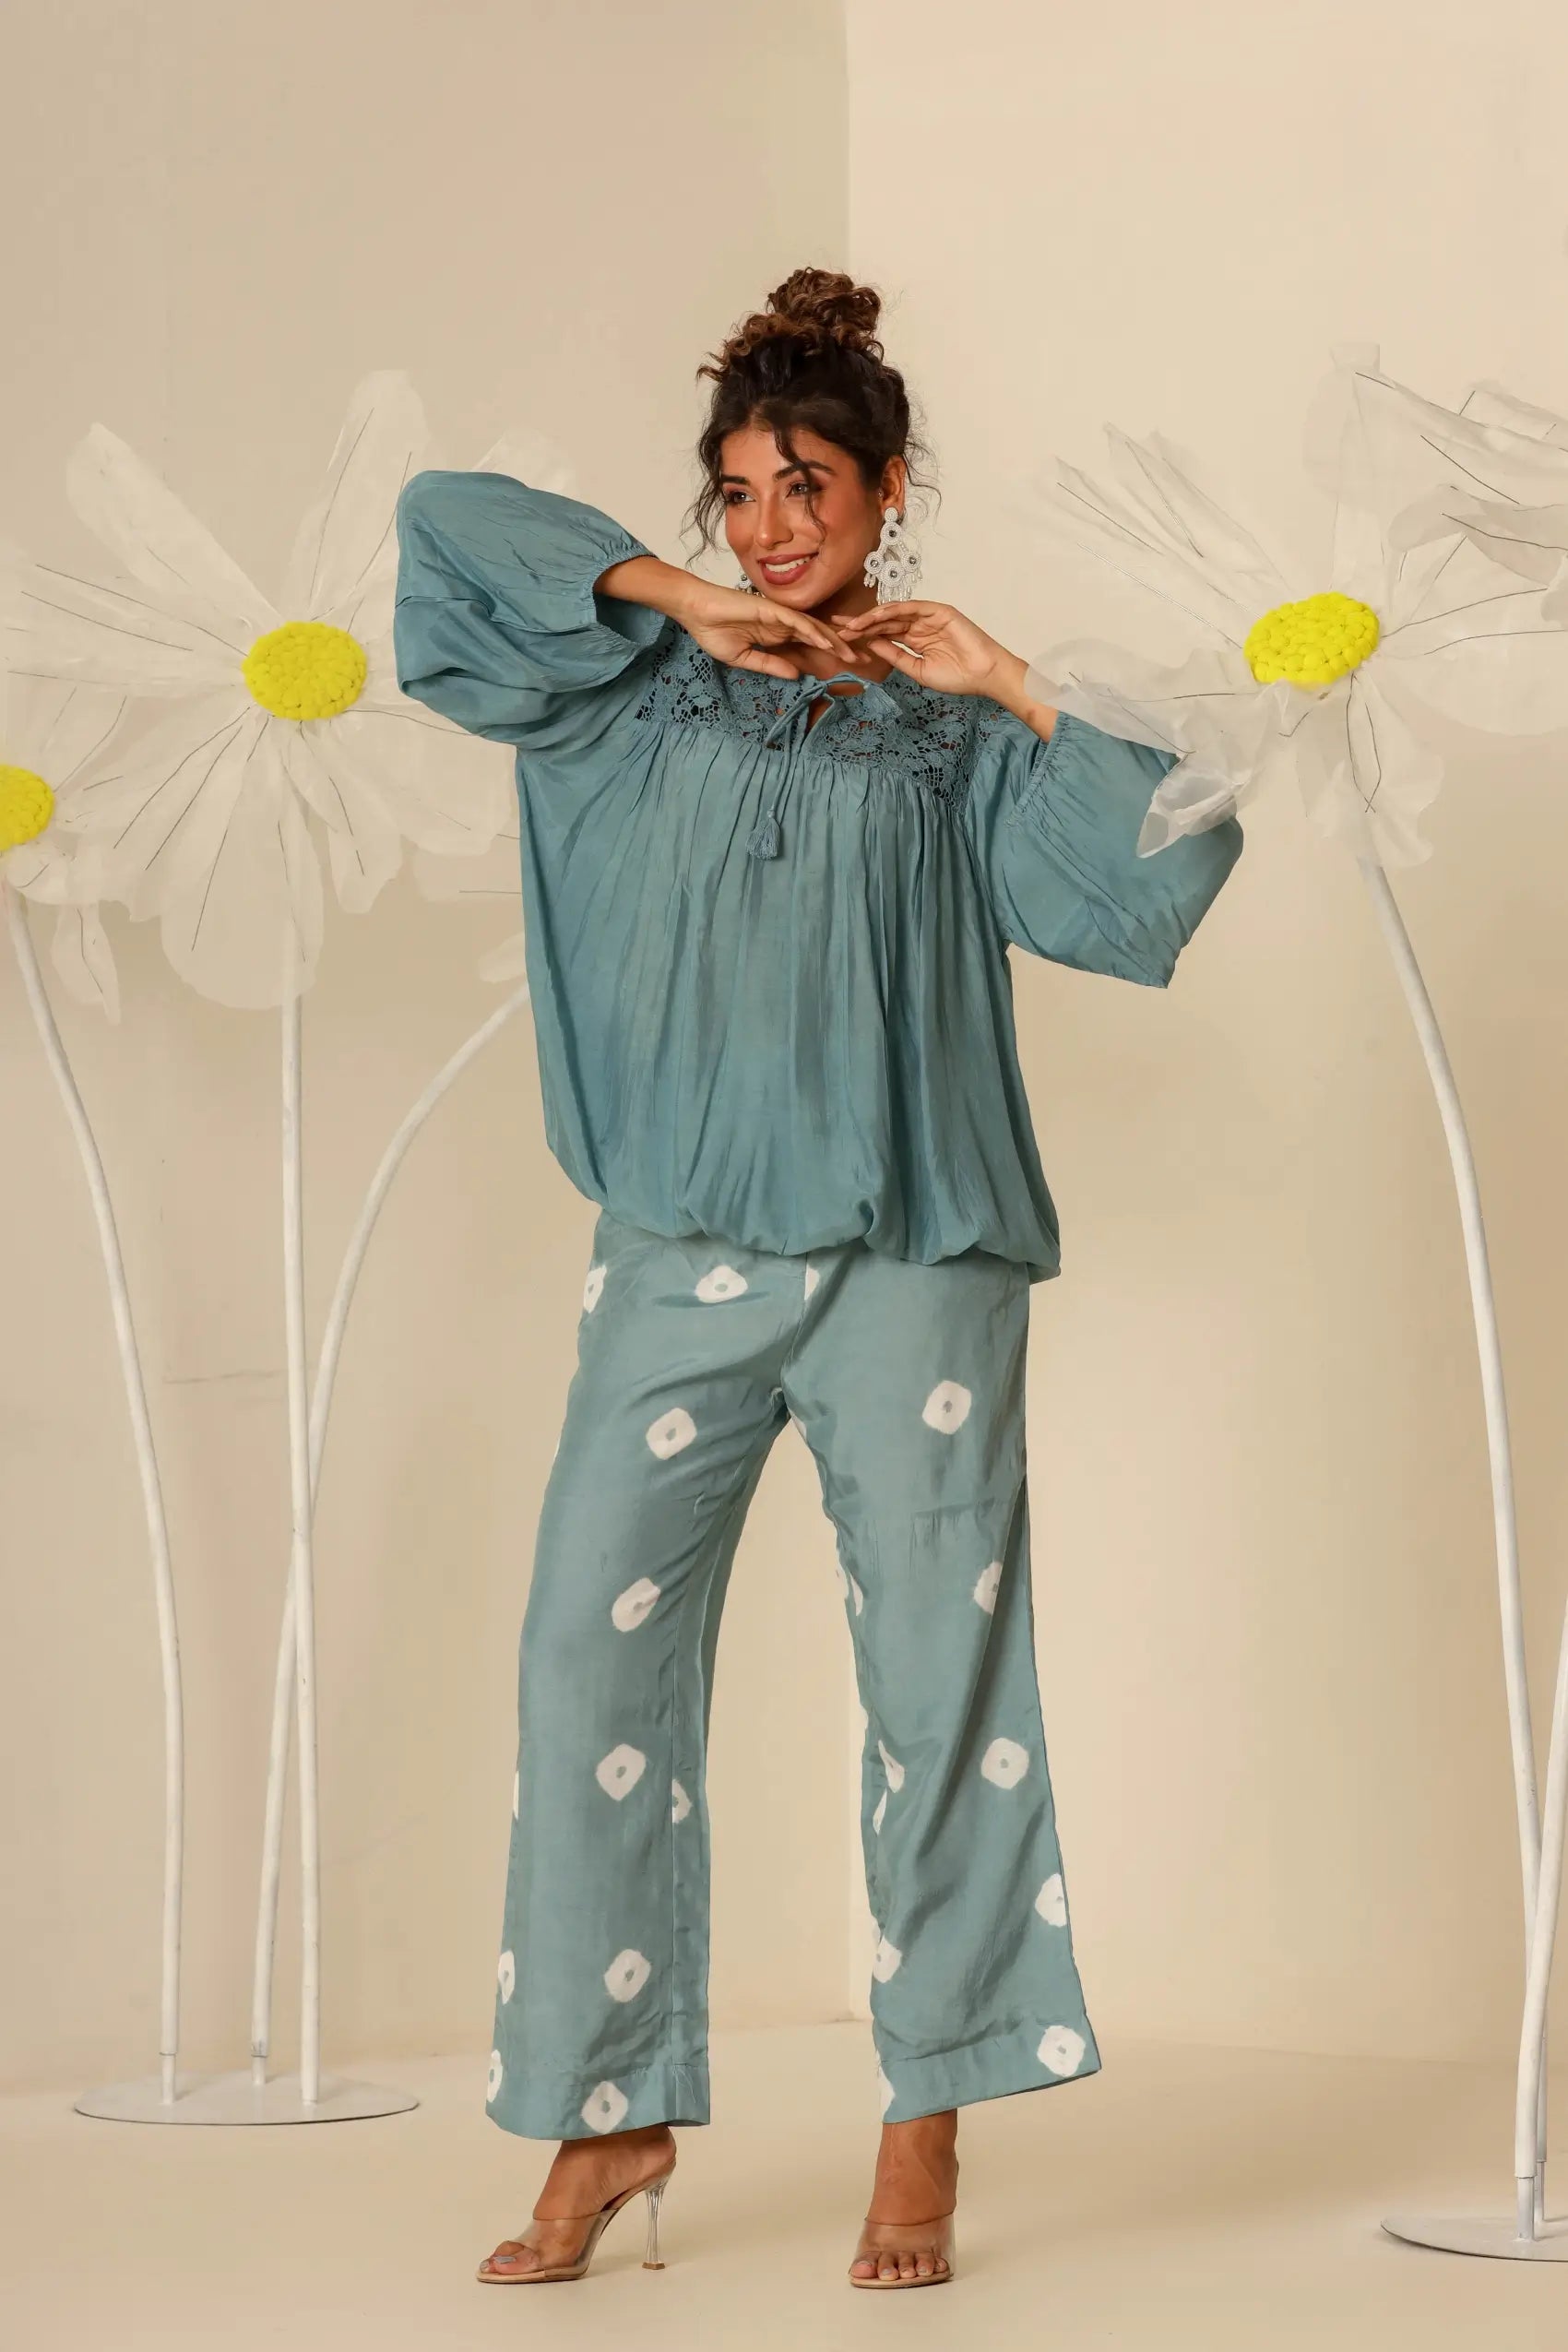 Petrol blue lace top with bandhej pants - Set of two